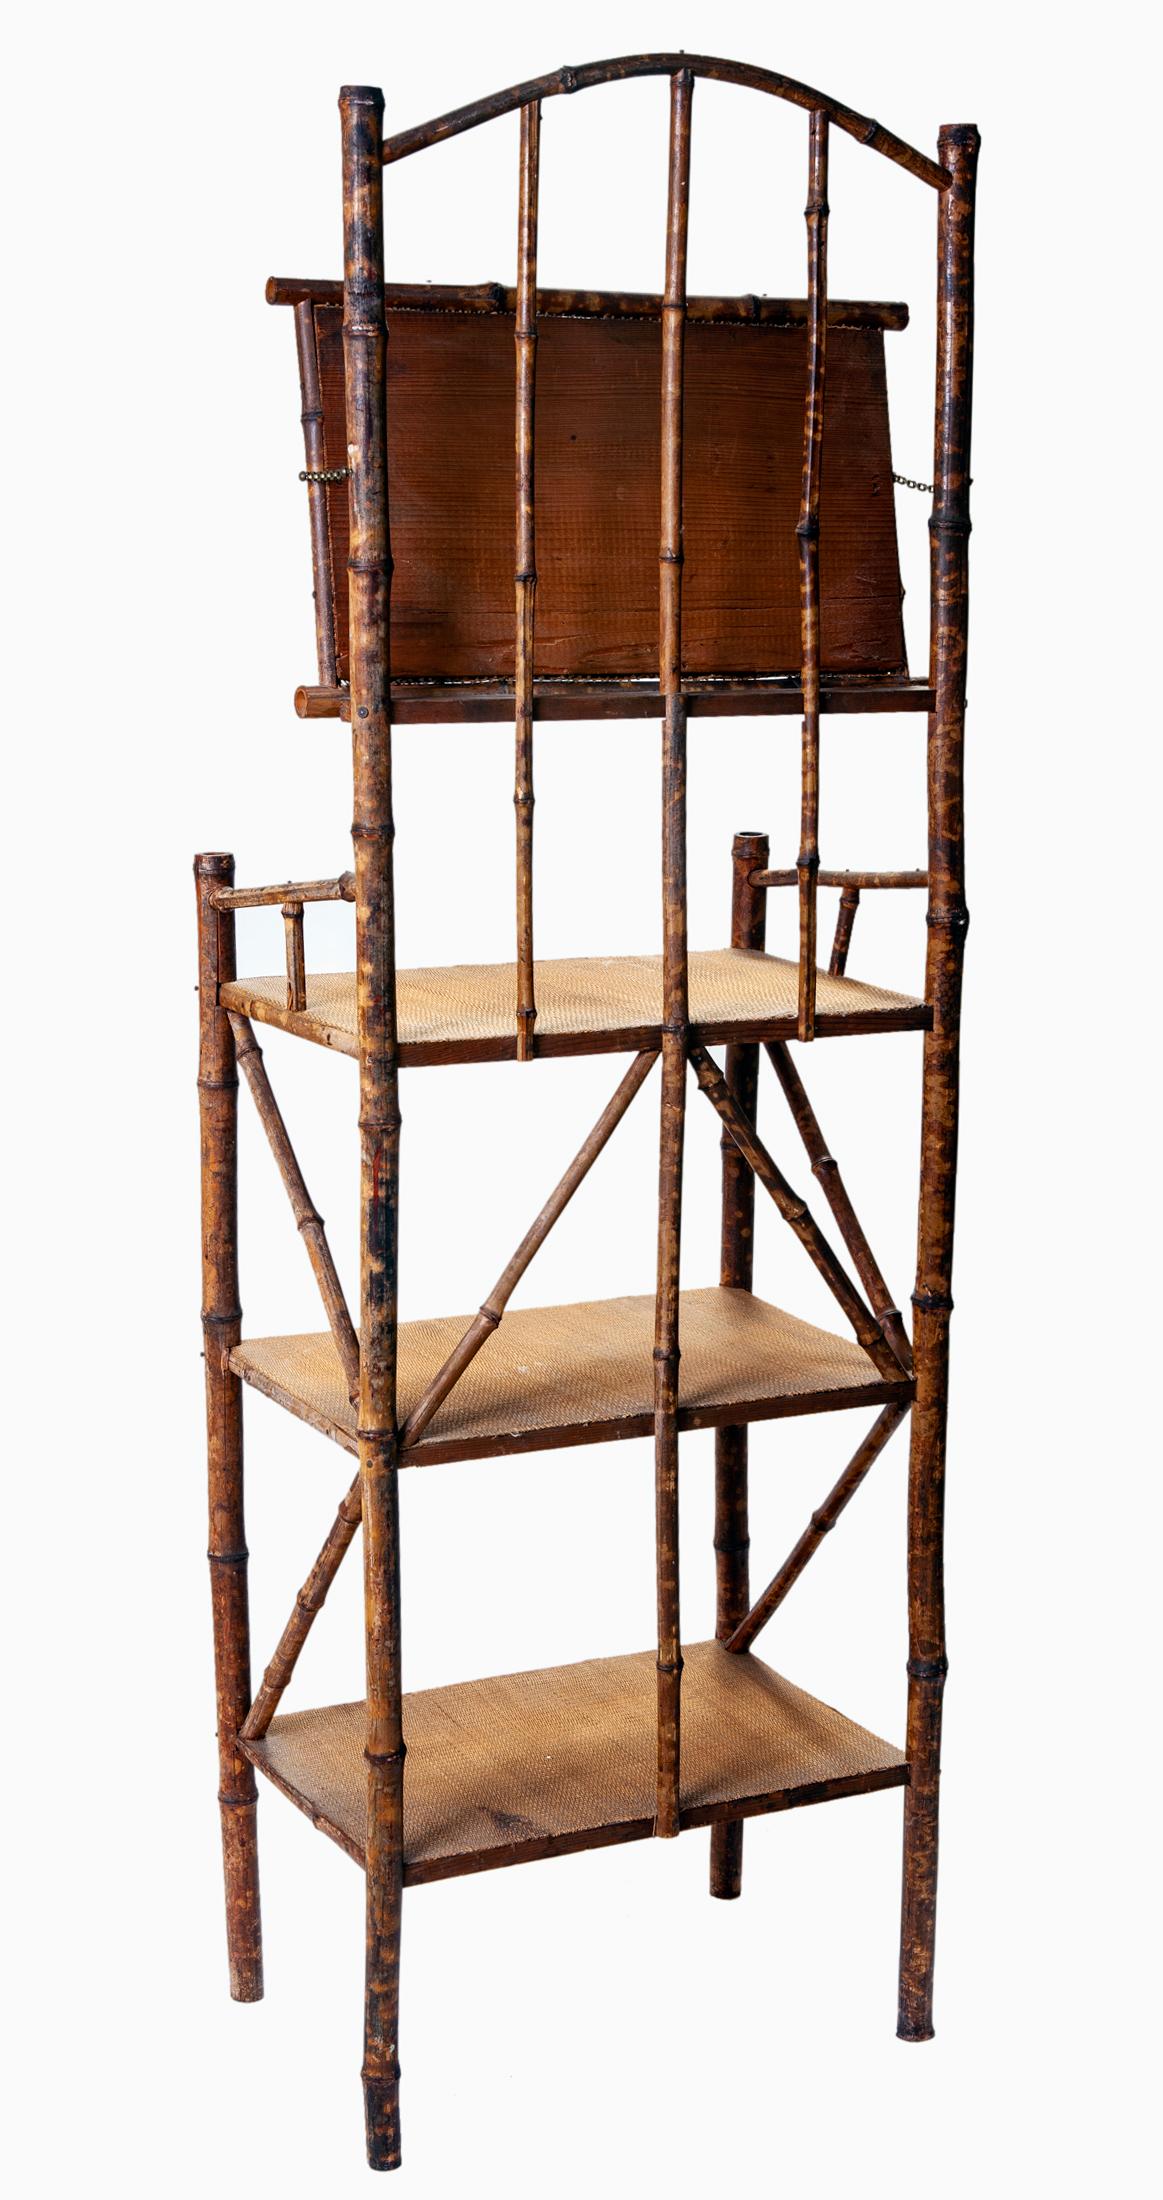 European Bamboo Etagere W 3 Shelves in Woven Fiber In Good Condition For Sale In Malibu, CA